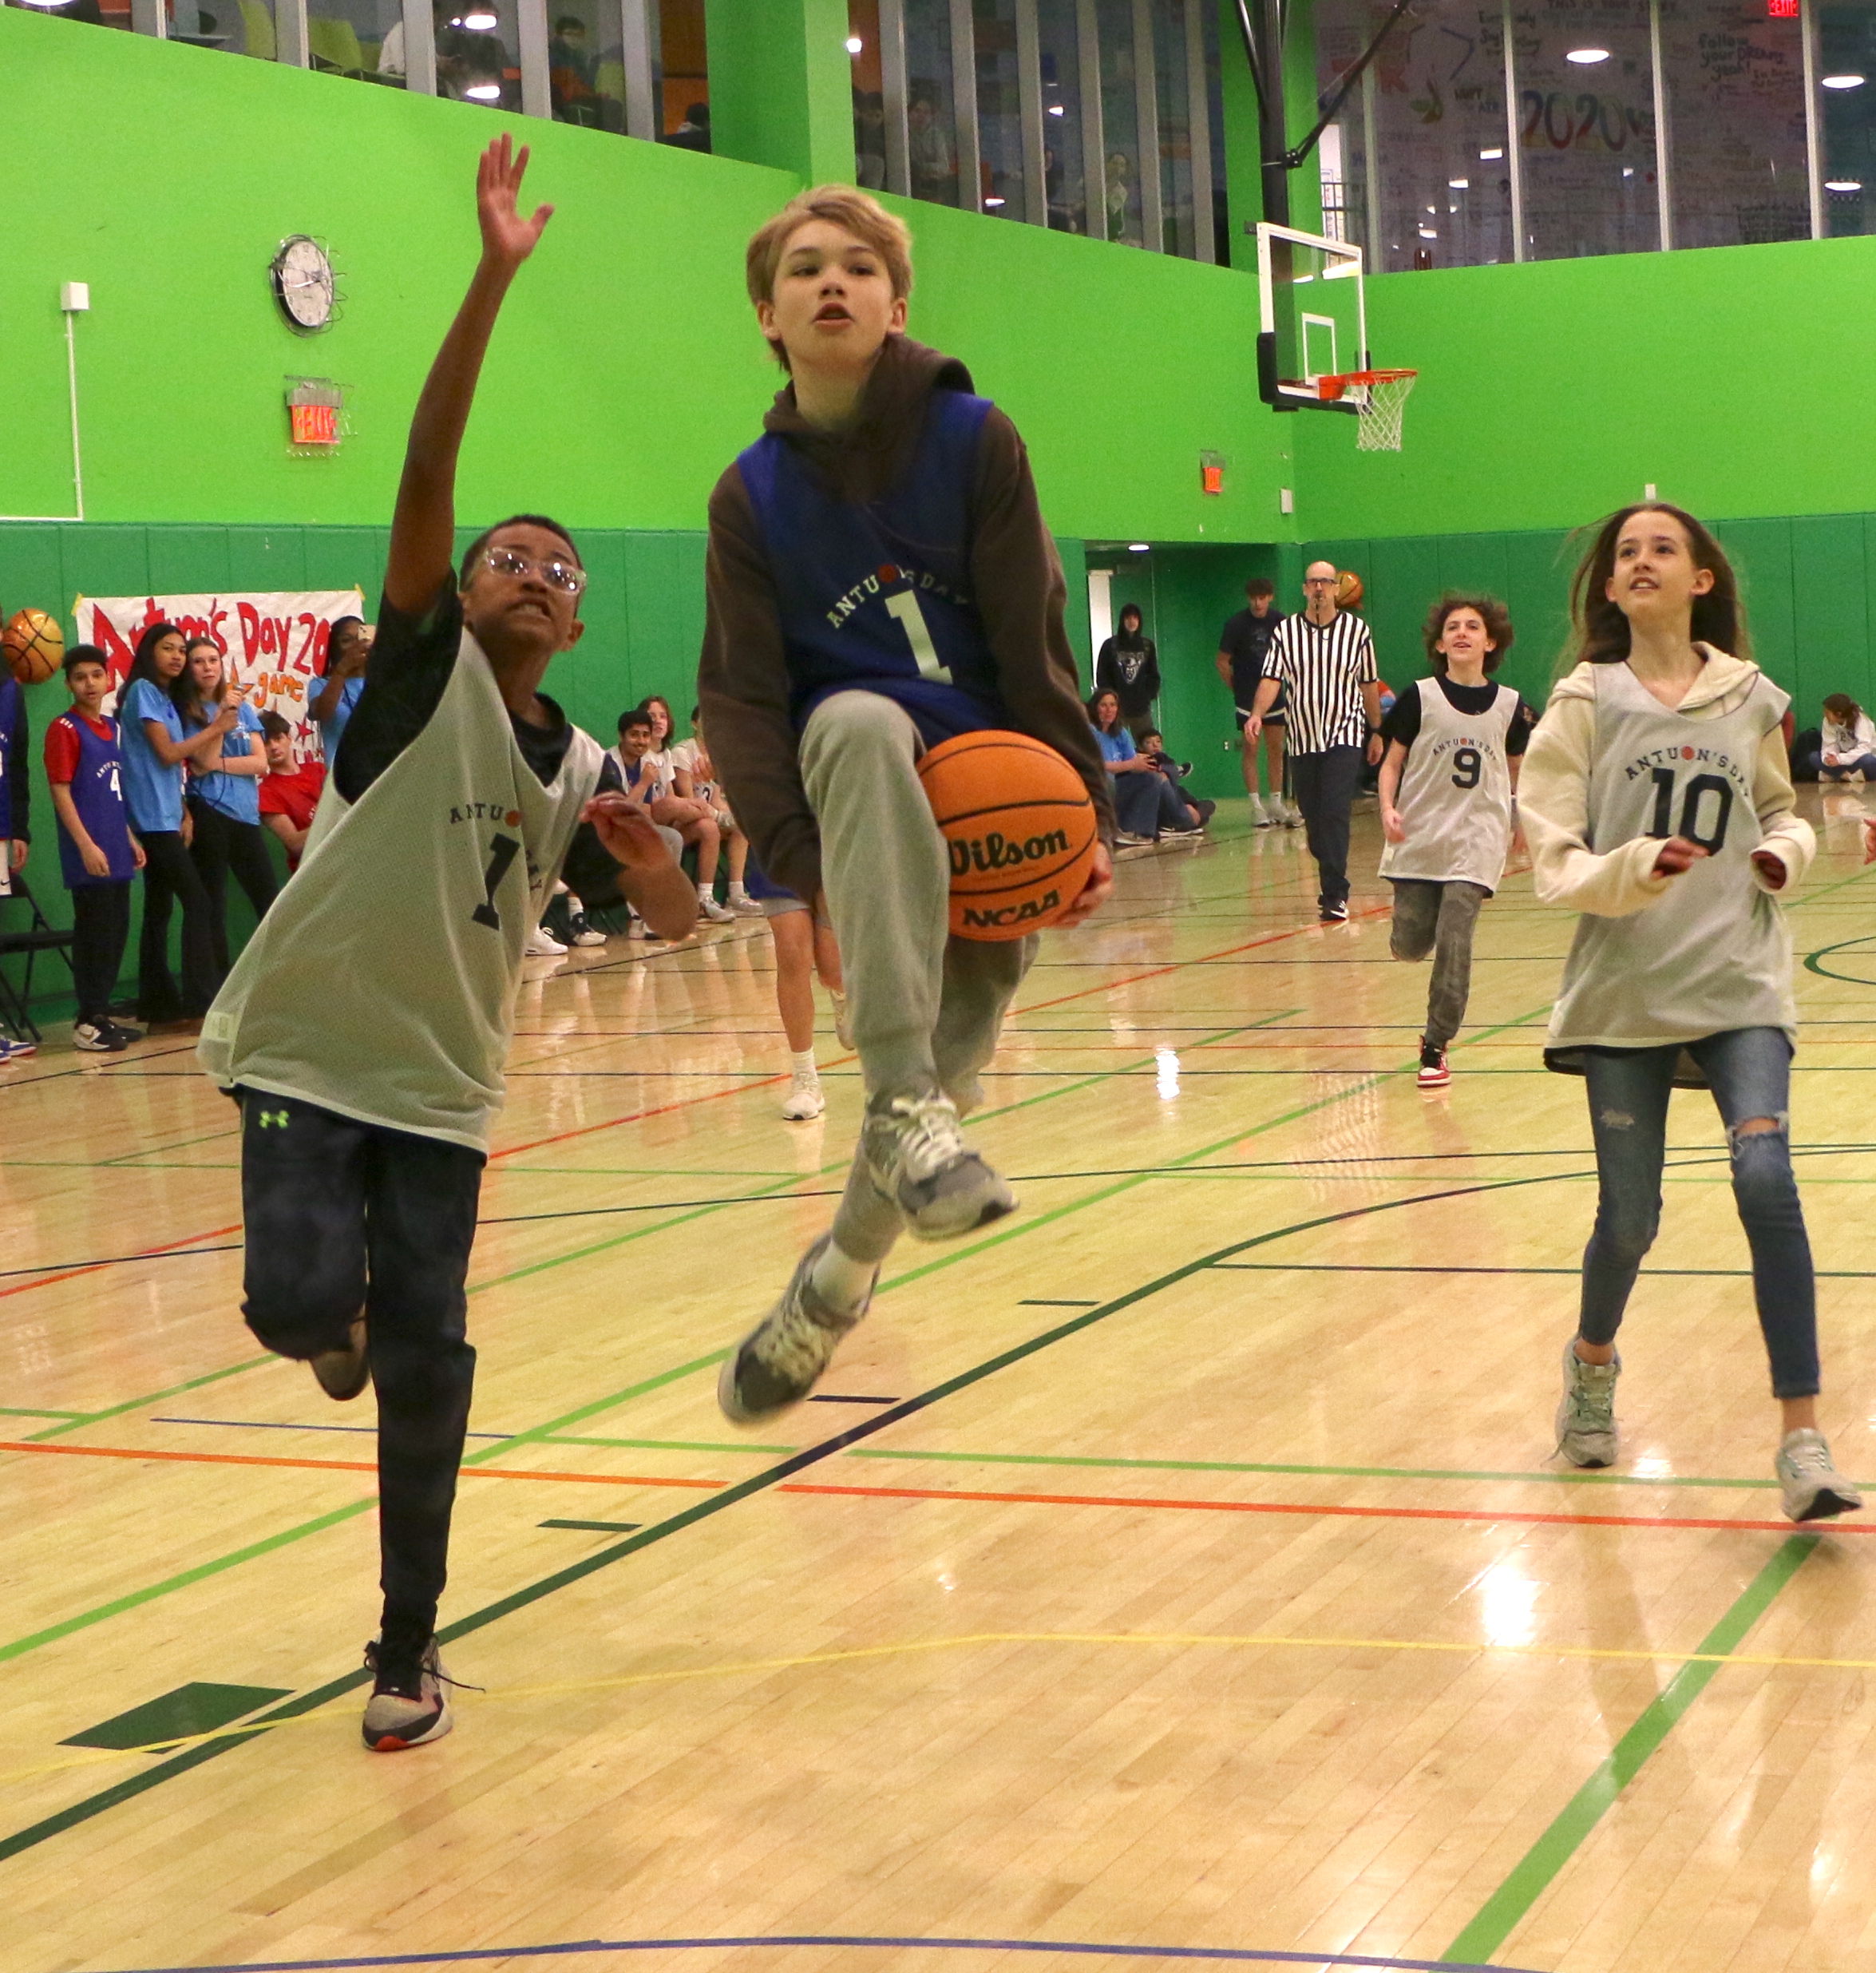 Students playing a basketball game